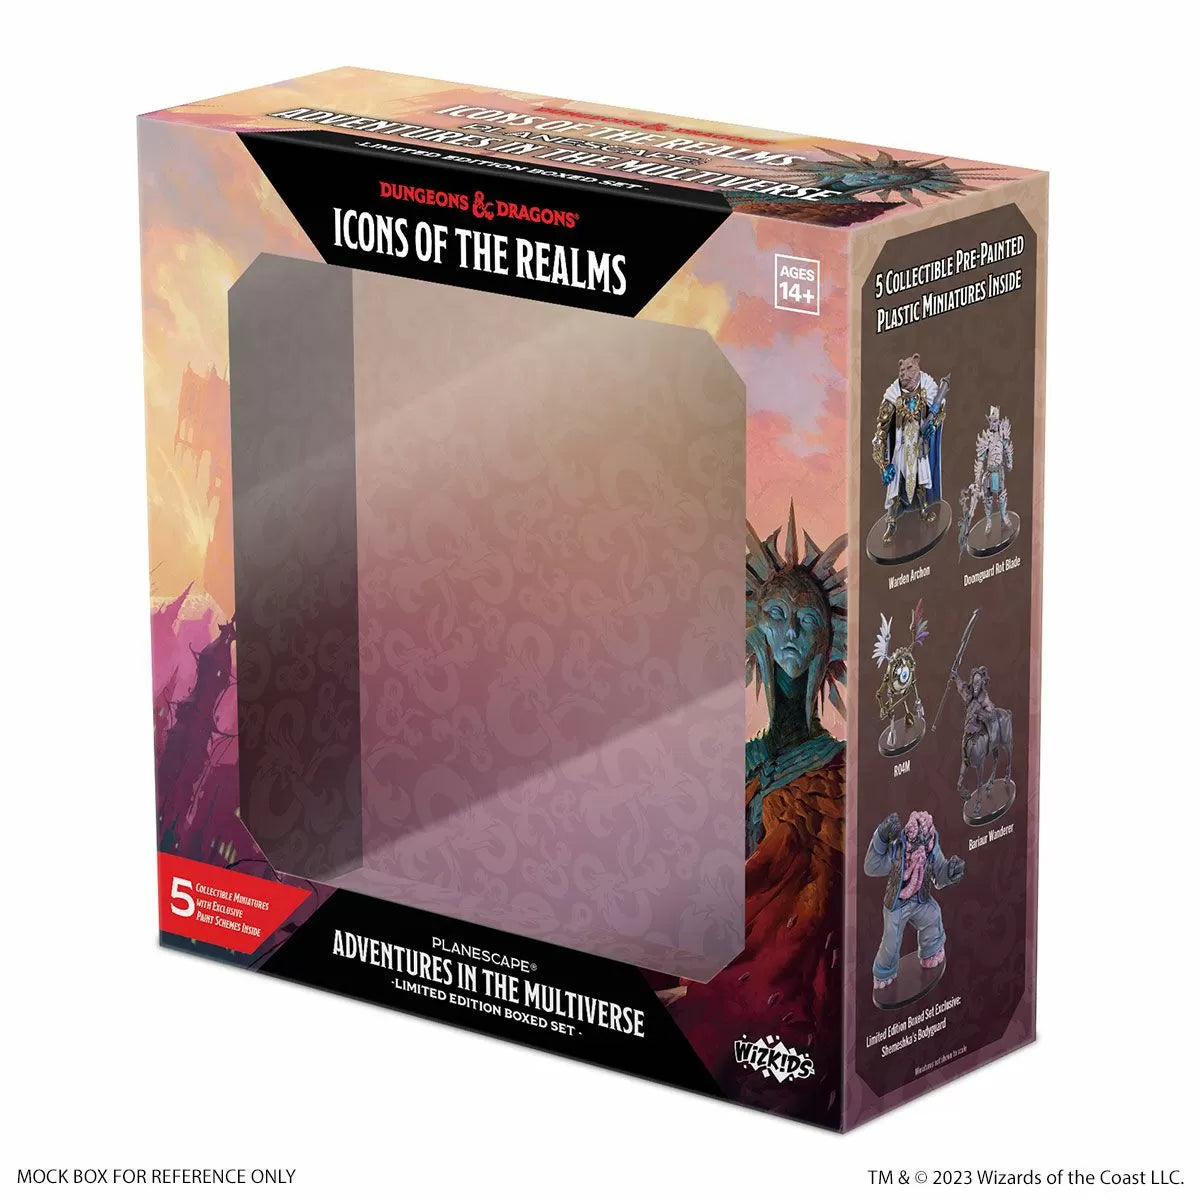 D&amp;D Icons of the Realms Planescape: Adventures in the Multiverse - Limited Edition Boxed Set